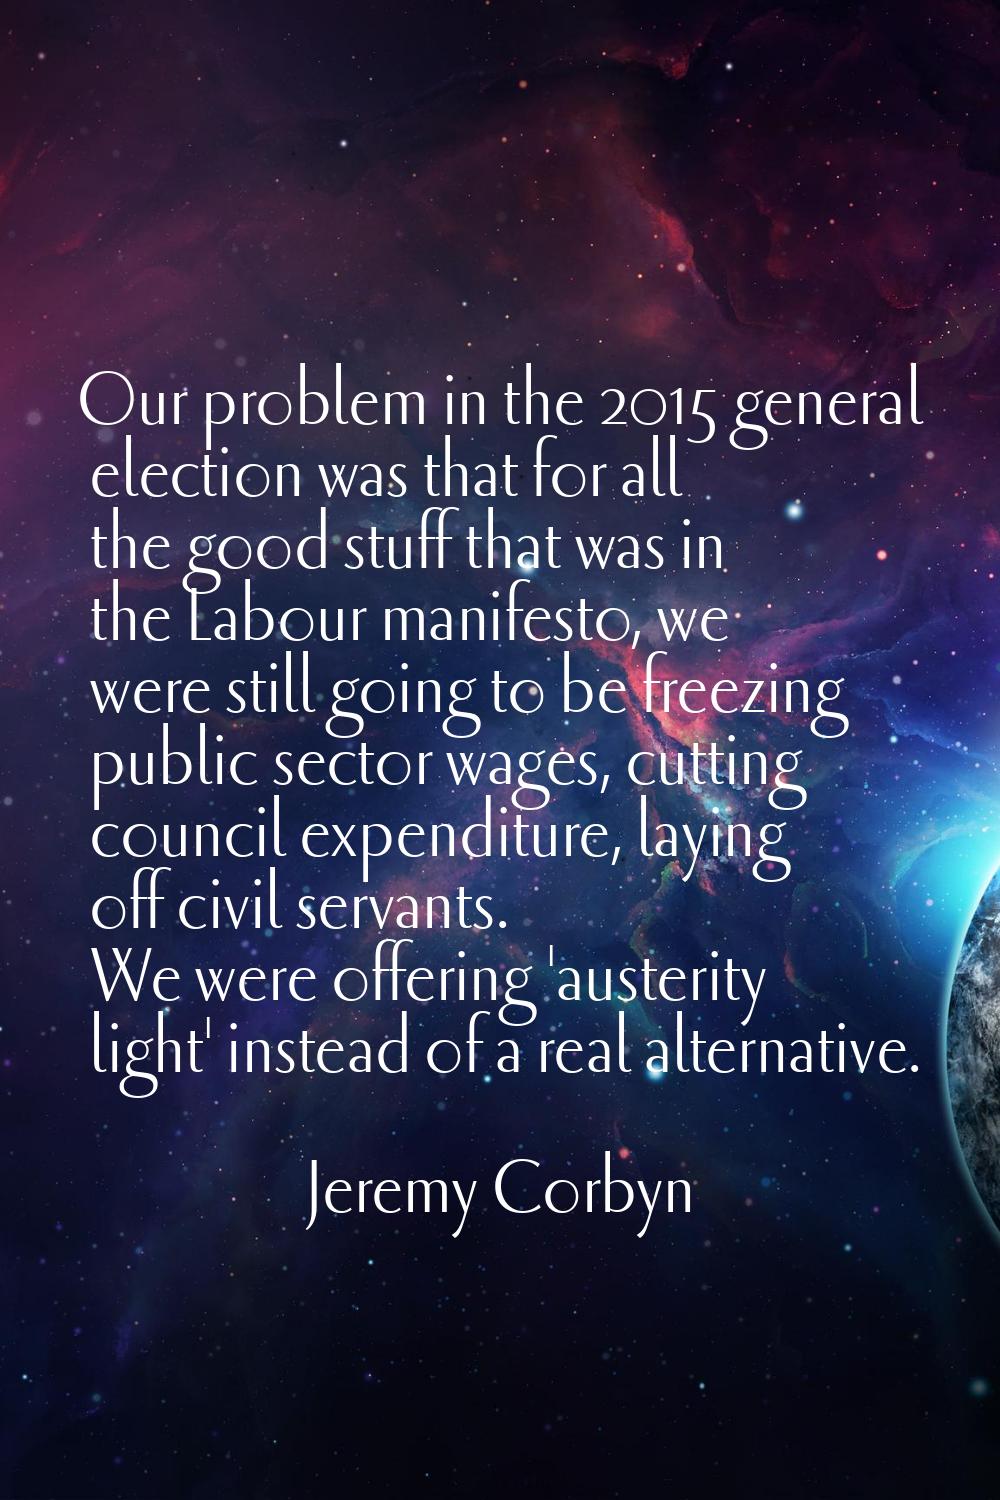 Our problem in the 2015 general election was that for all the good stuff that was in the Labour man